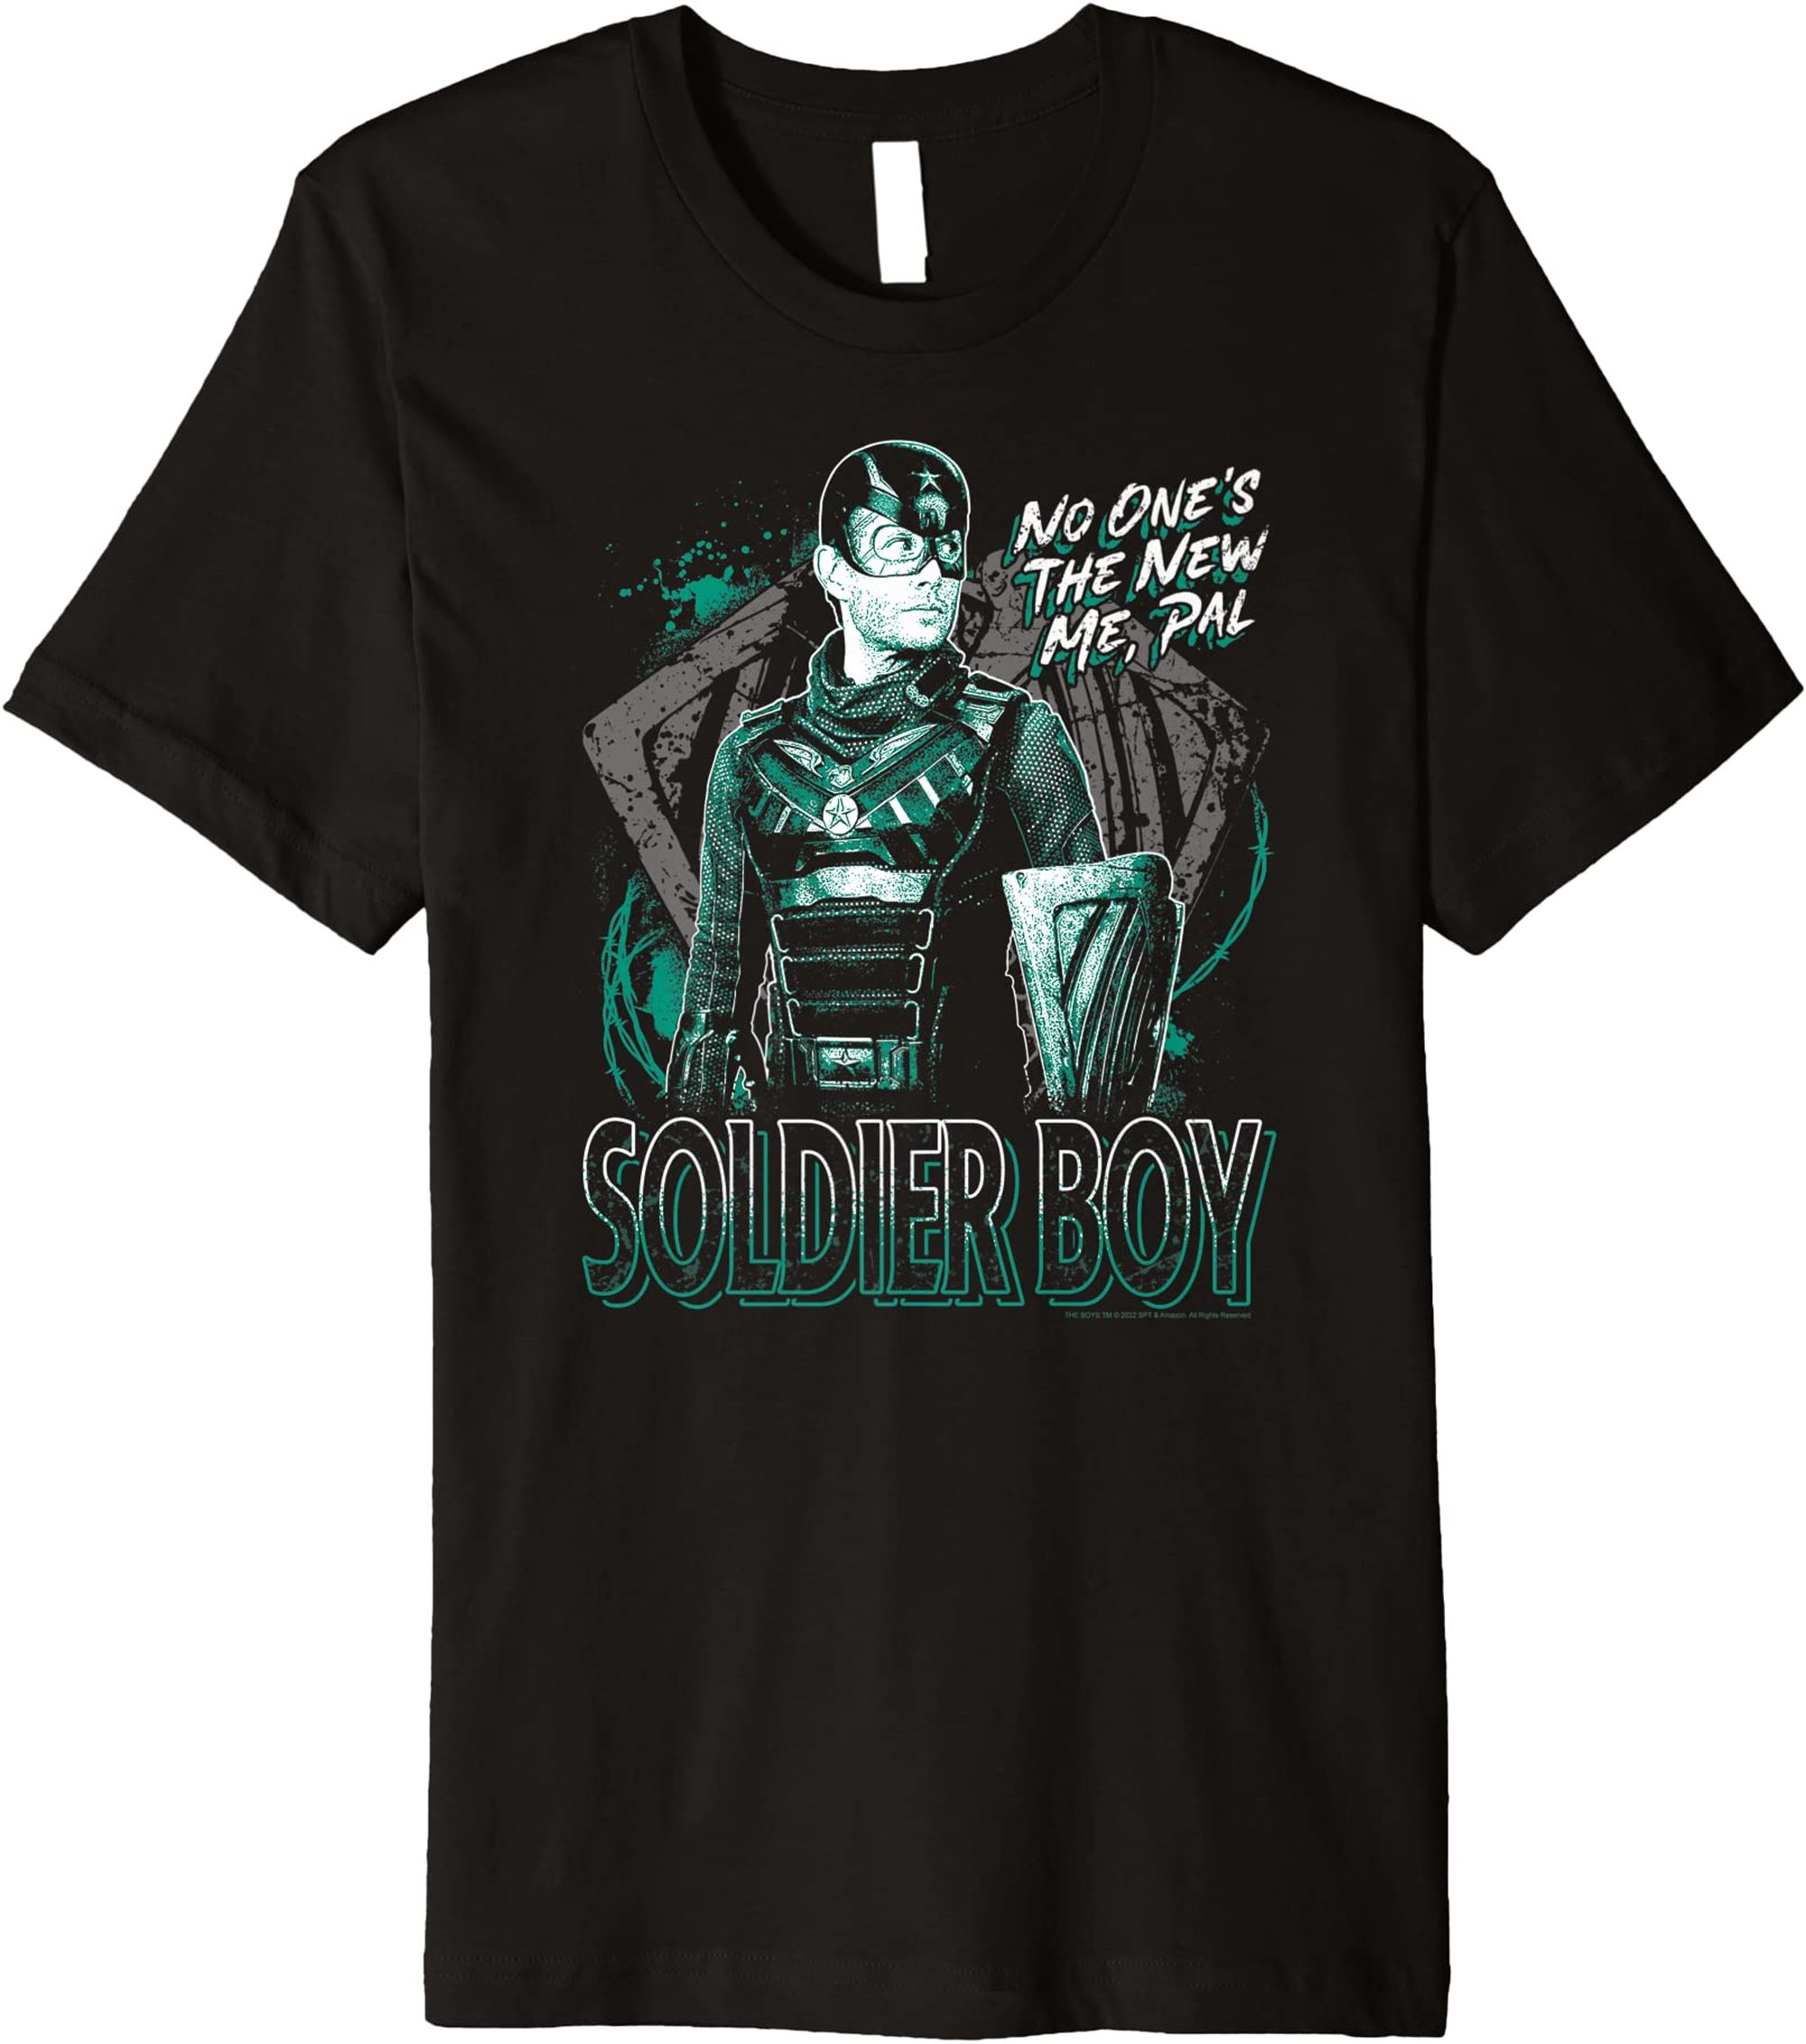 The Boys Soldier Boy Premium T-shirt Full Size Up To 5xl